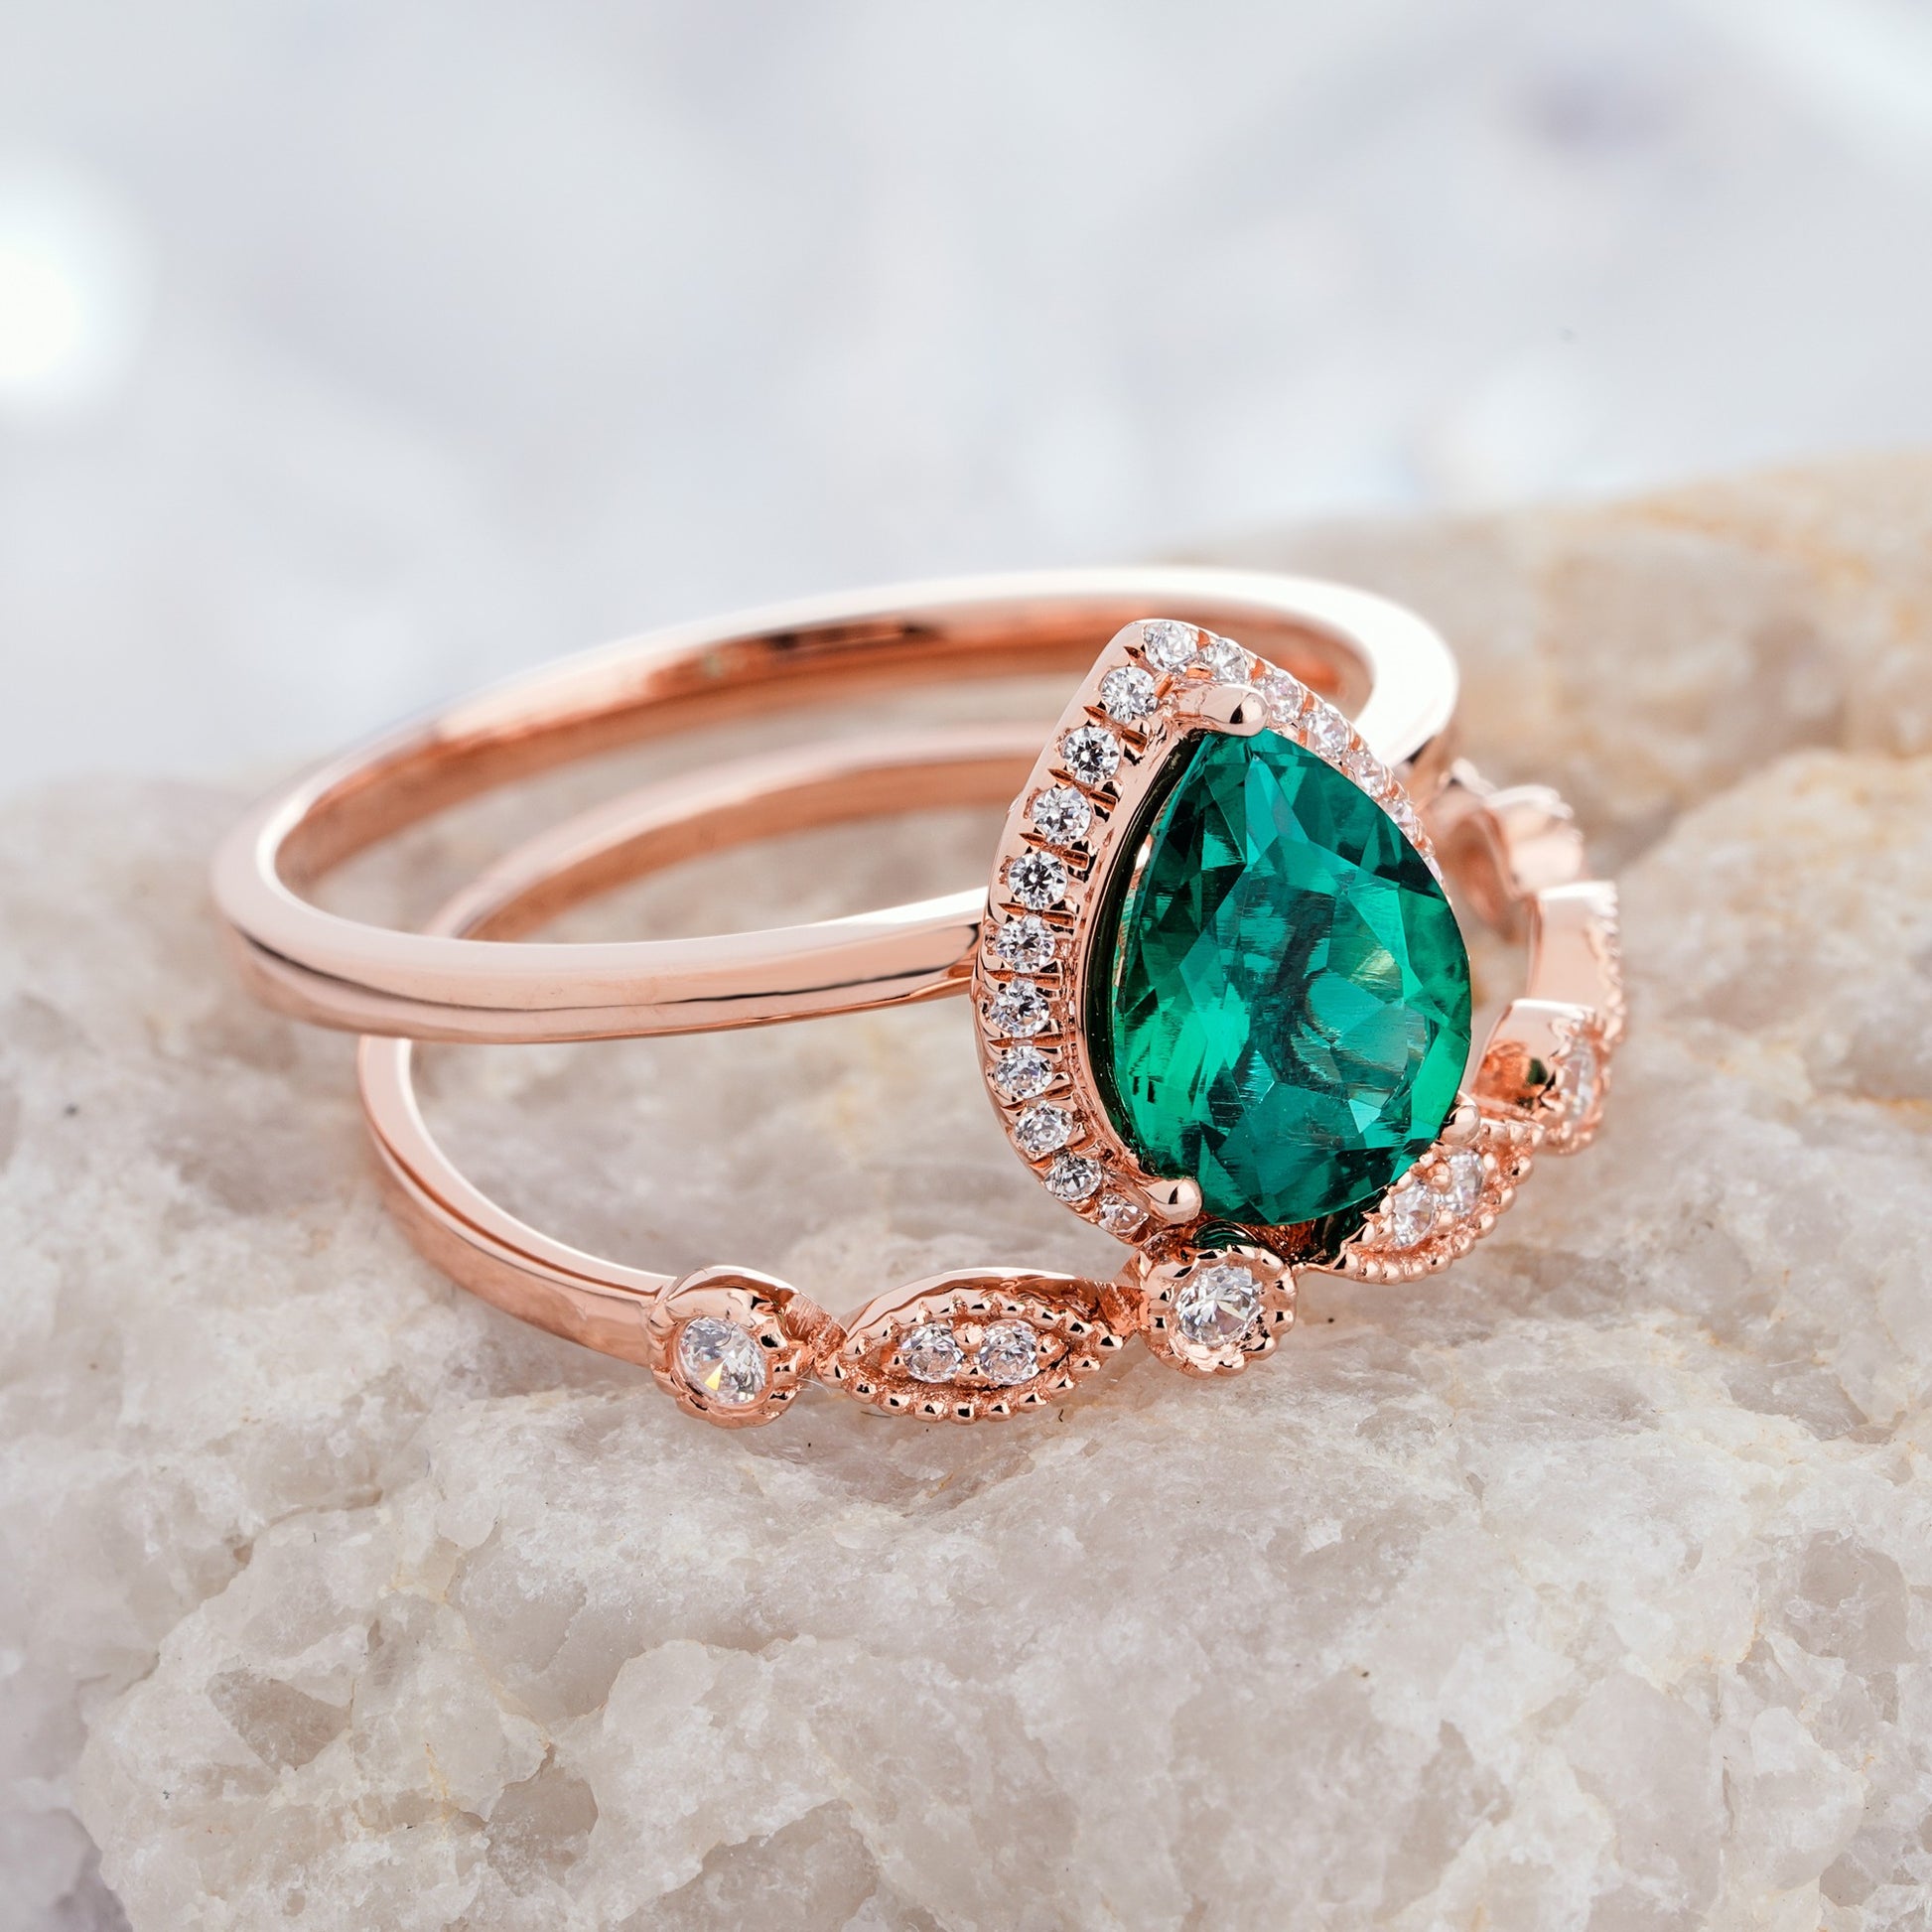 Pear Cut Emerald Engagement Ring Set in 14K/18K Gold - ShainJewelry